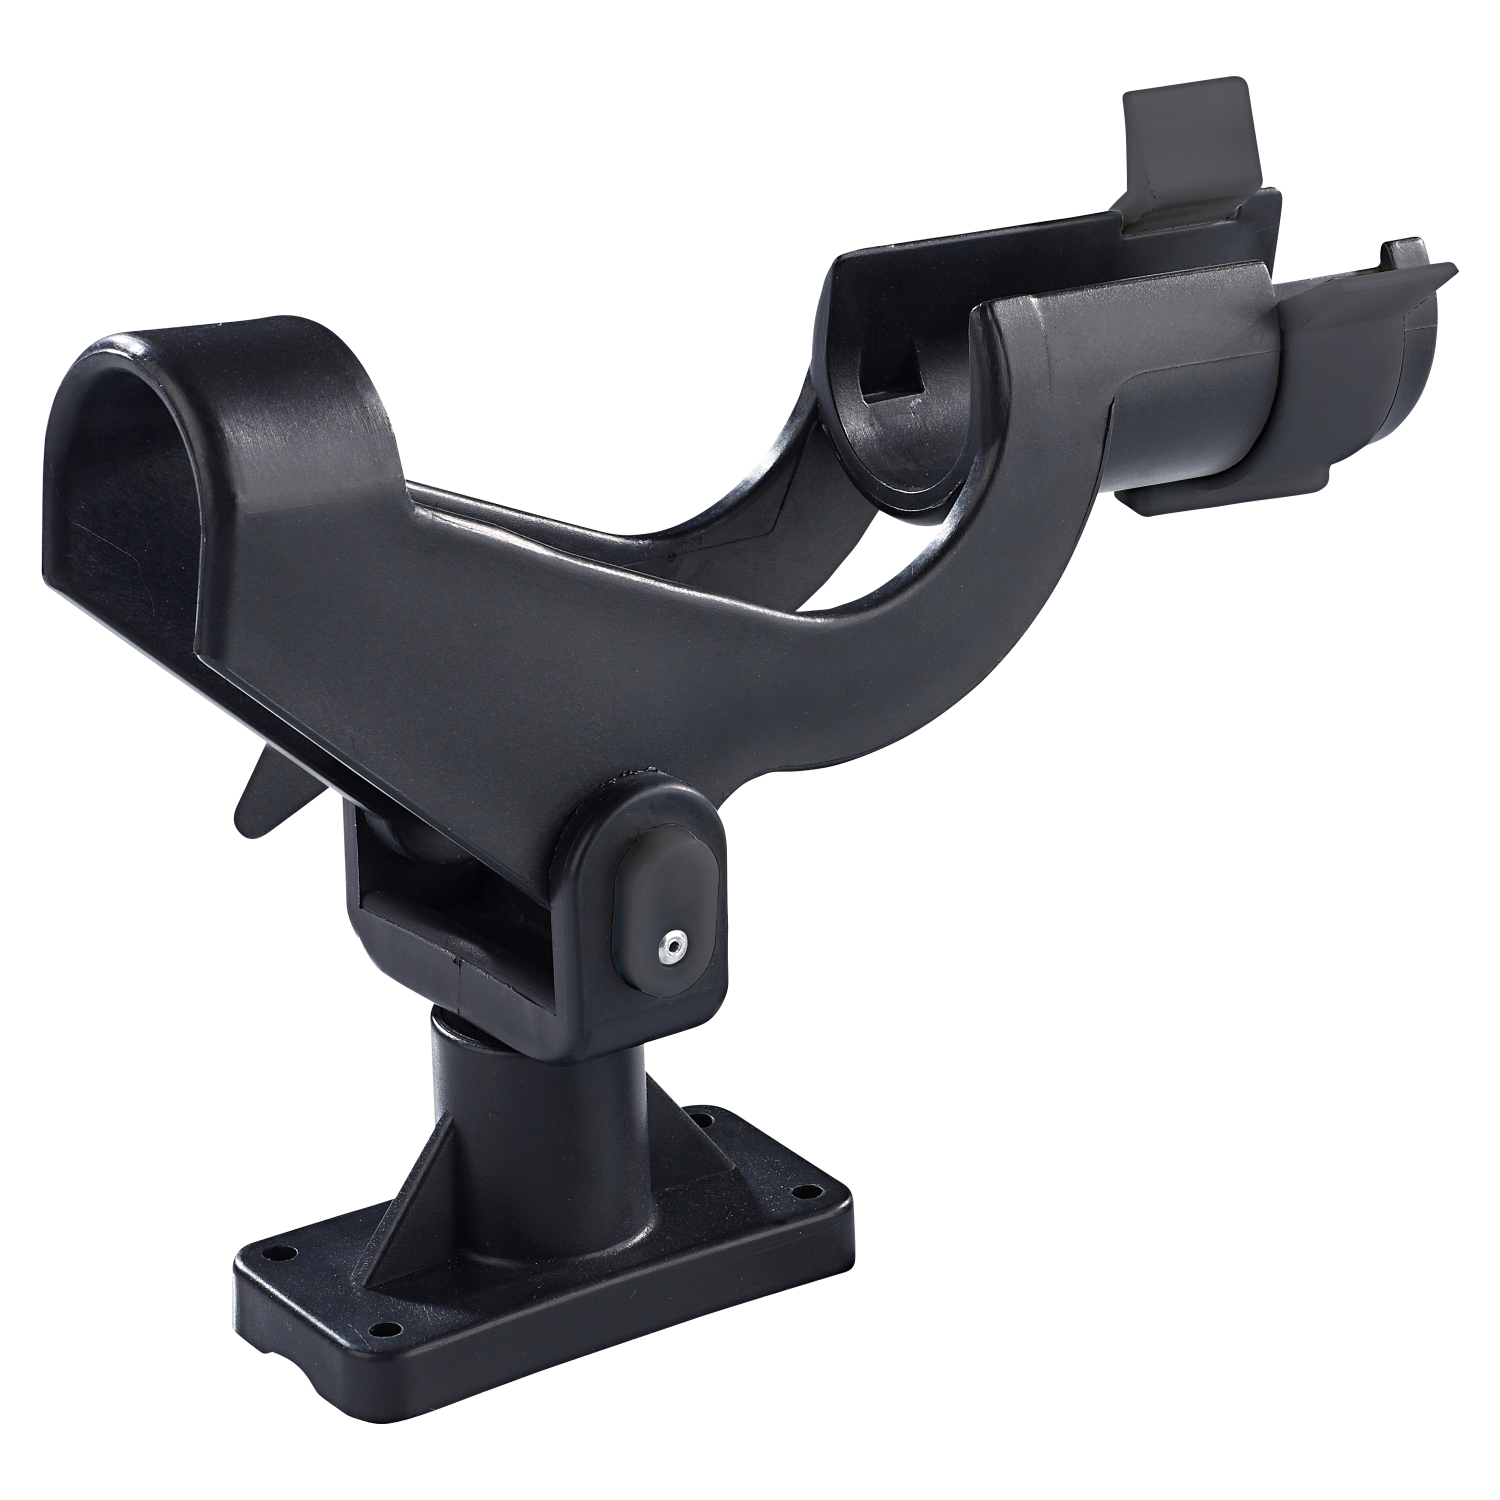 Balzer Boat Rod holder at low prices